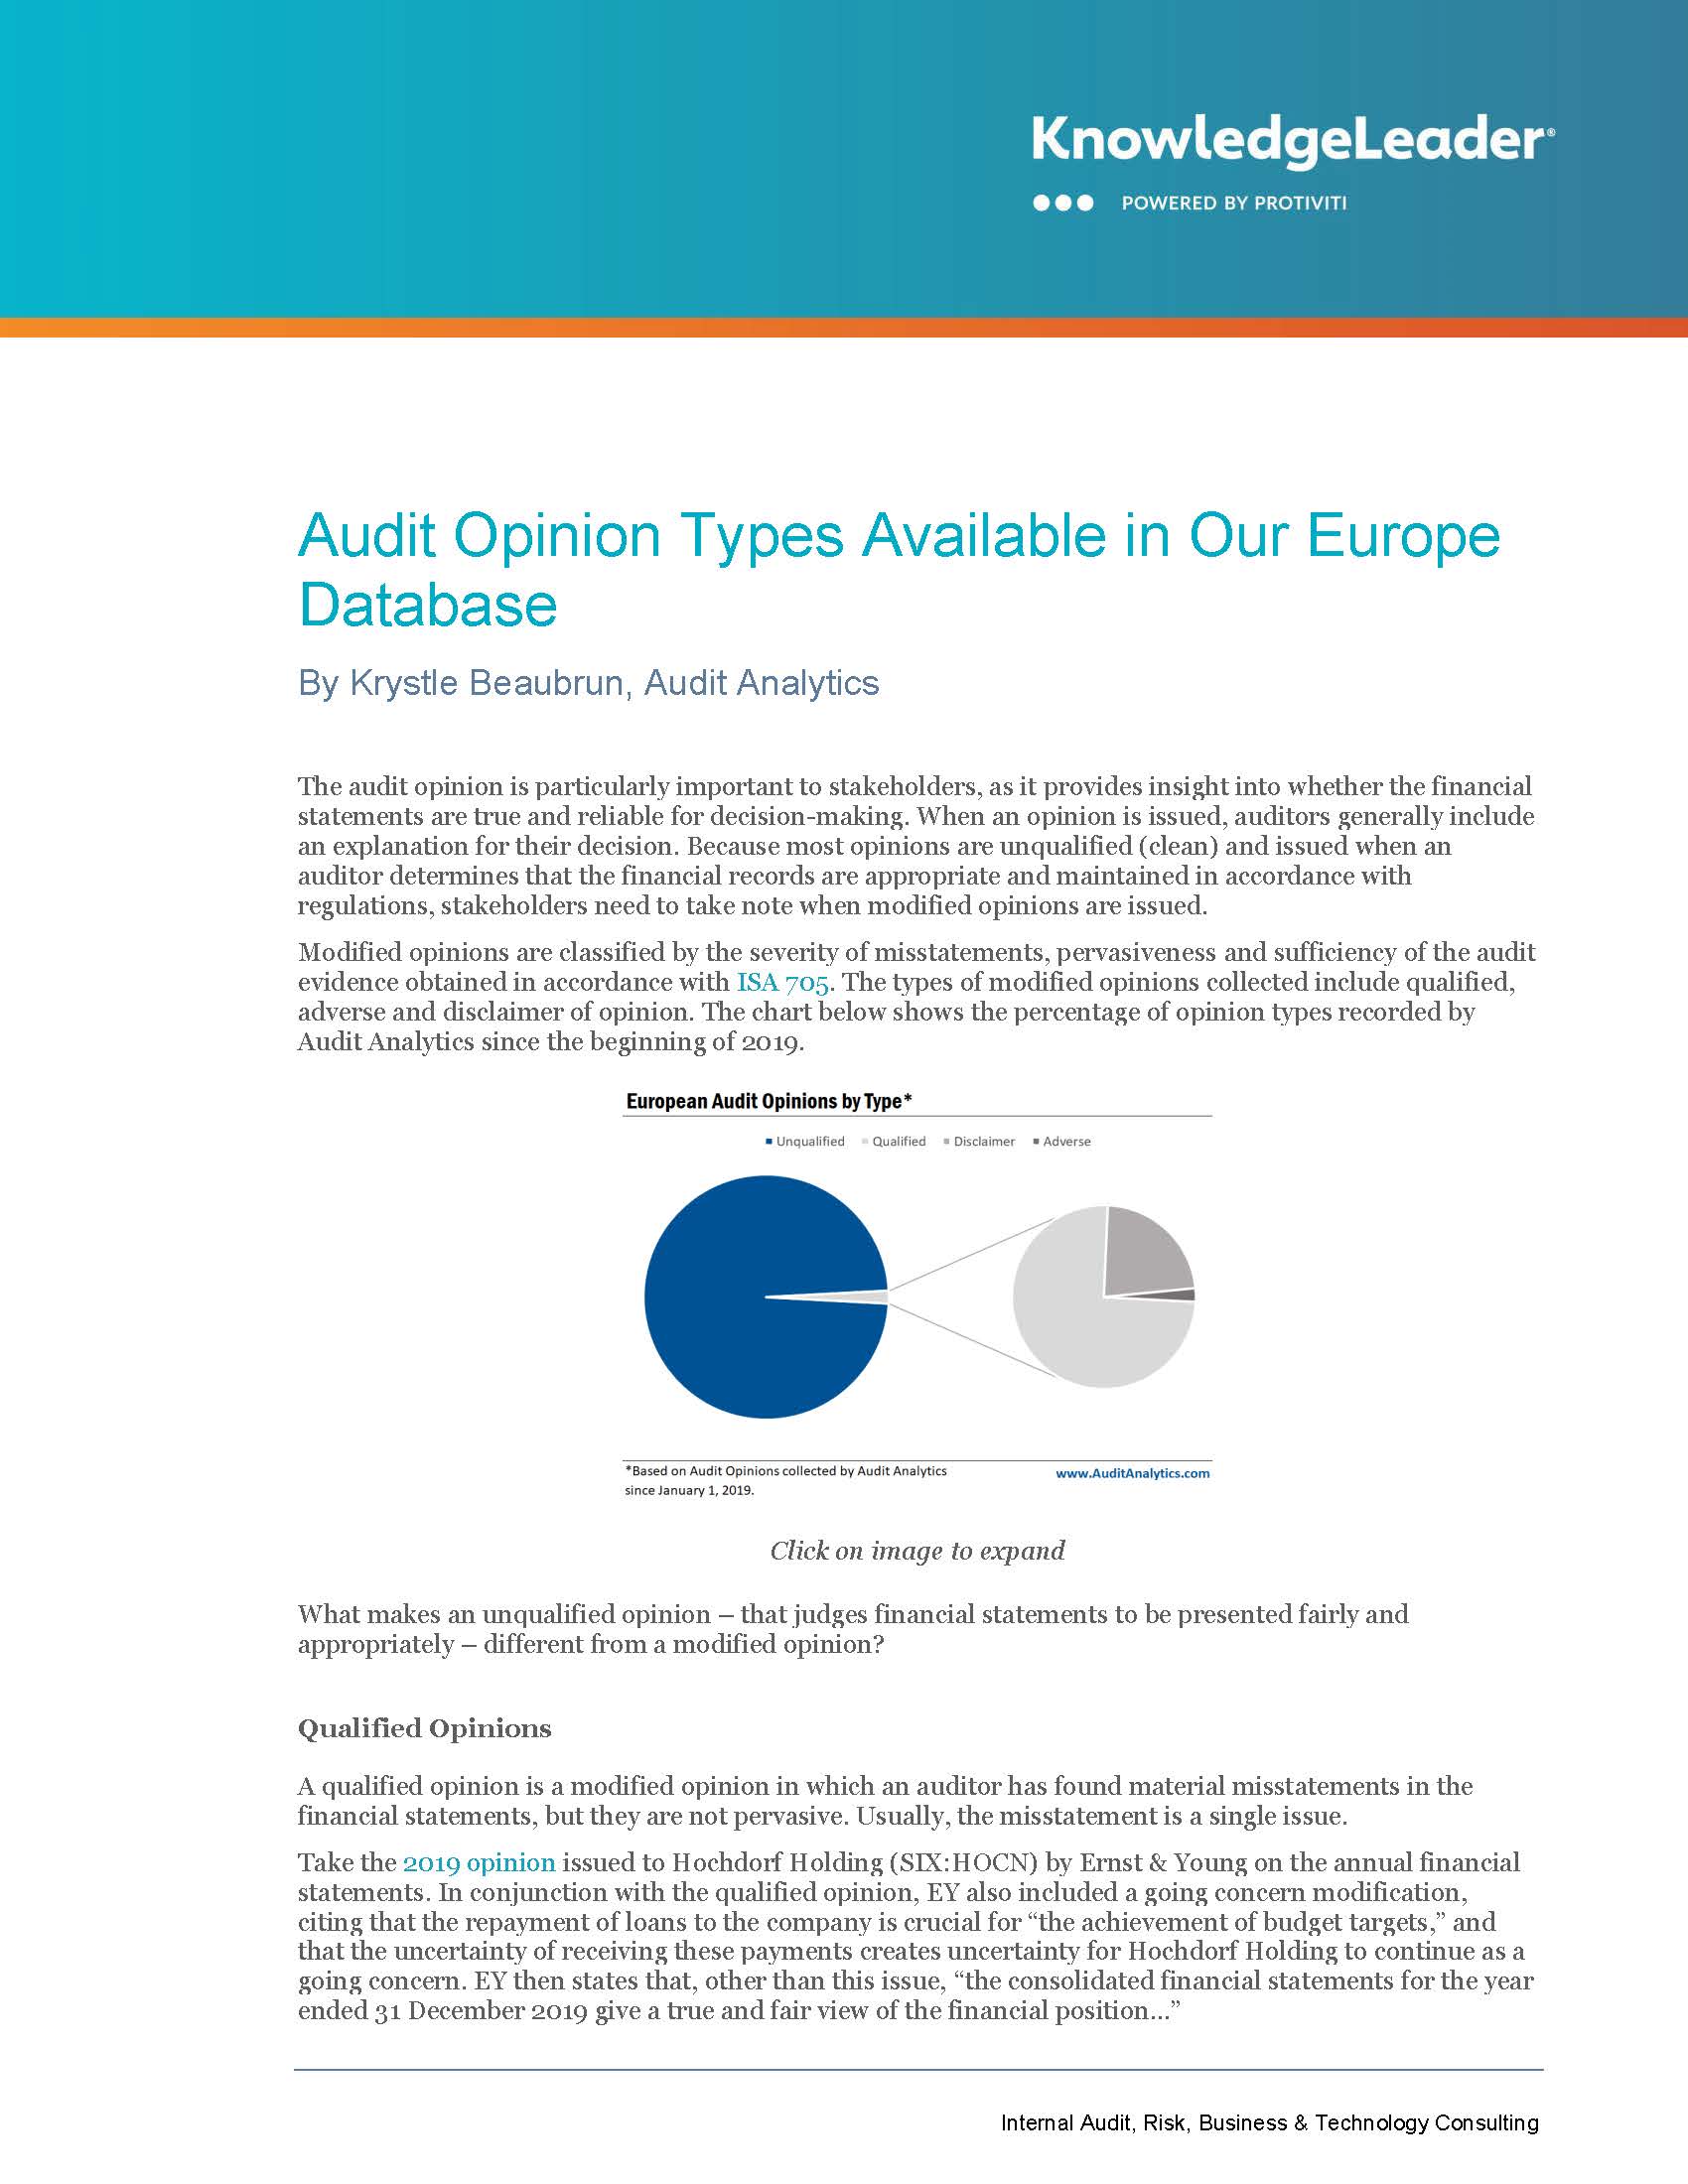 Screenshot of the first page of Audit Opinion Types Available in Our Europe Database